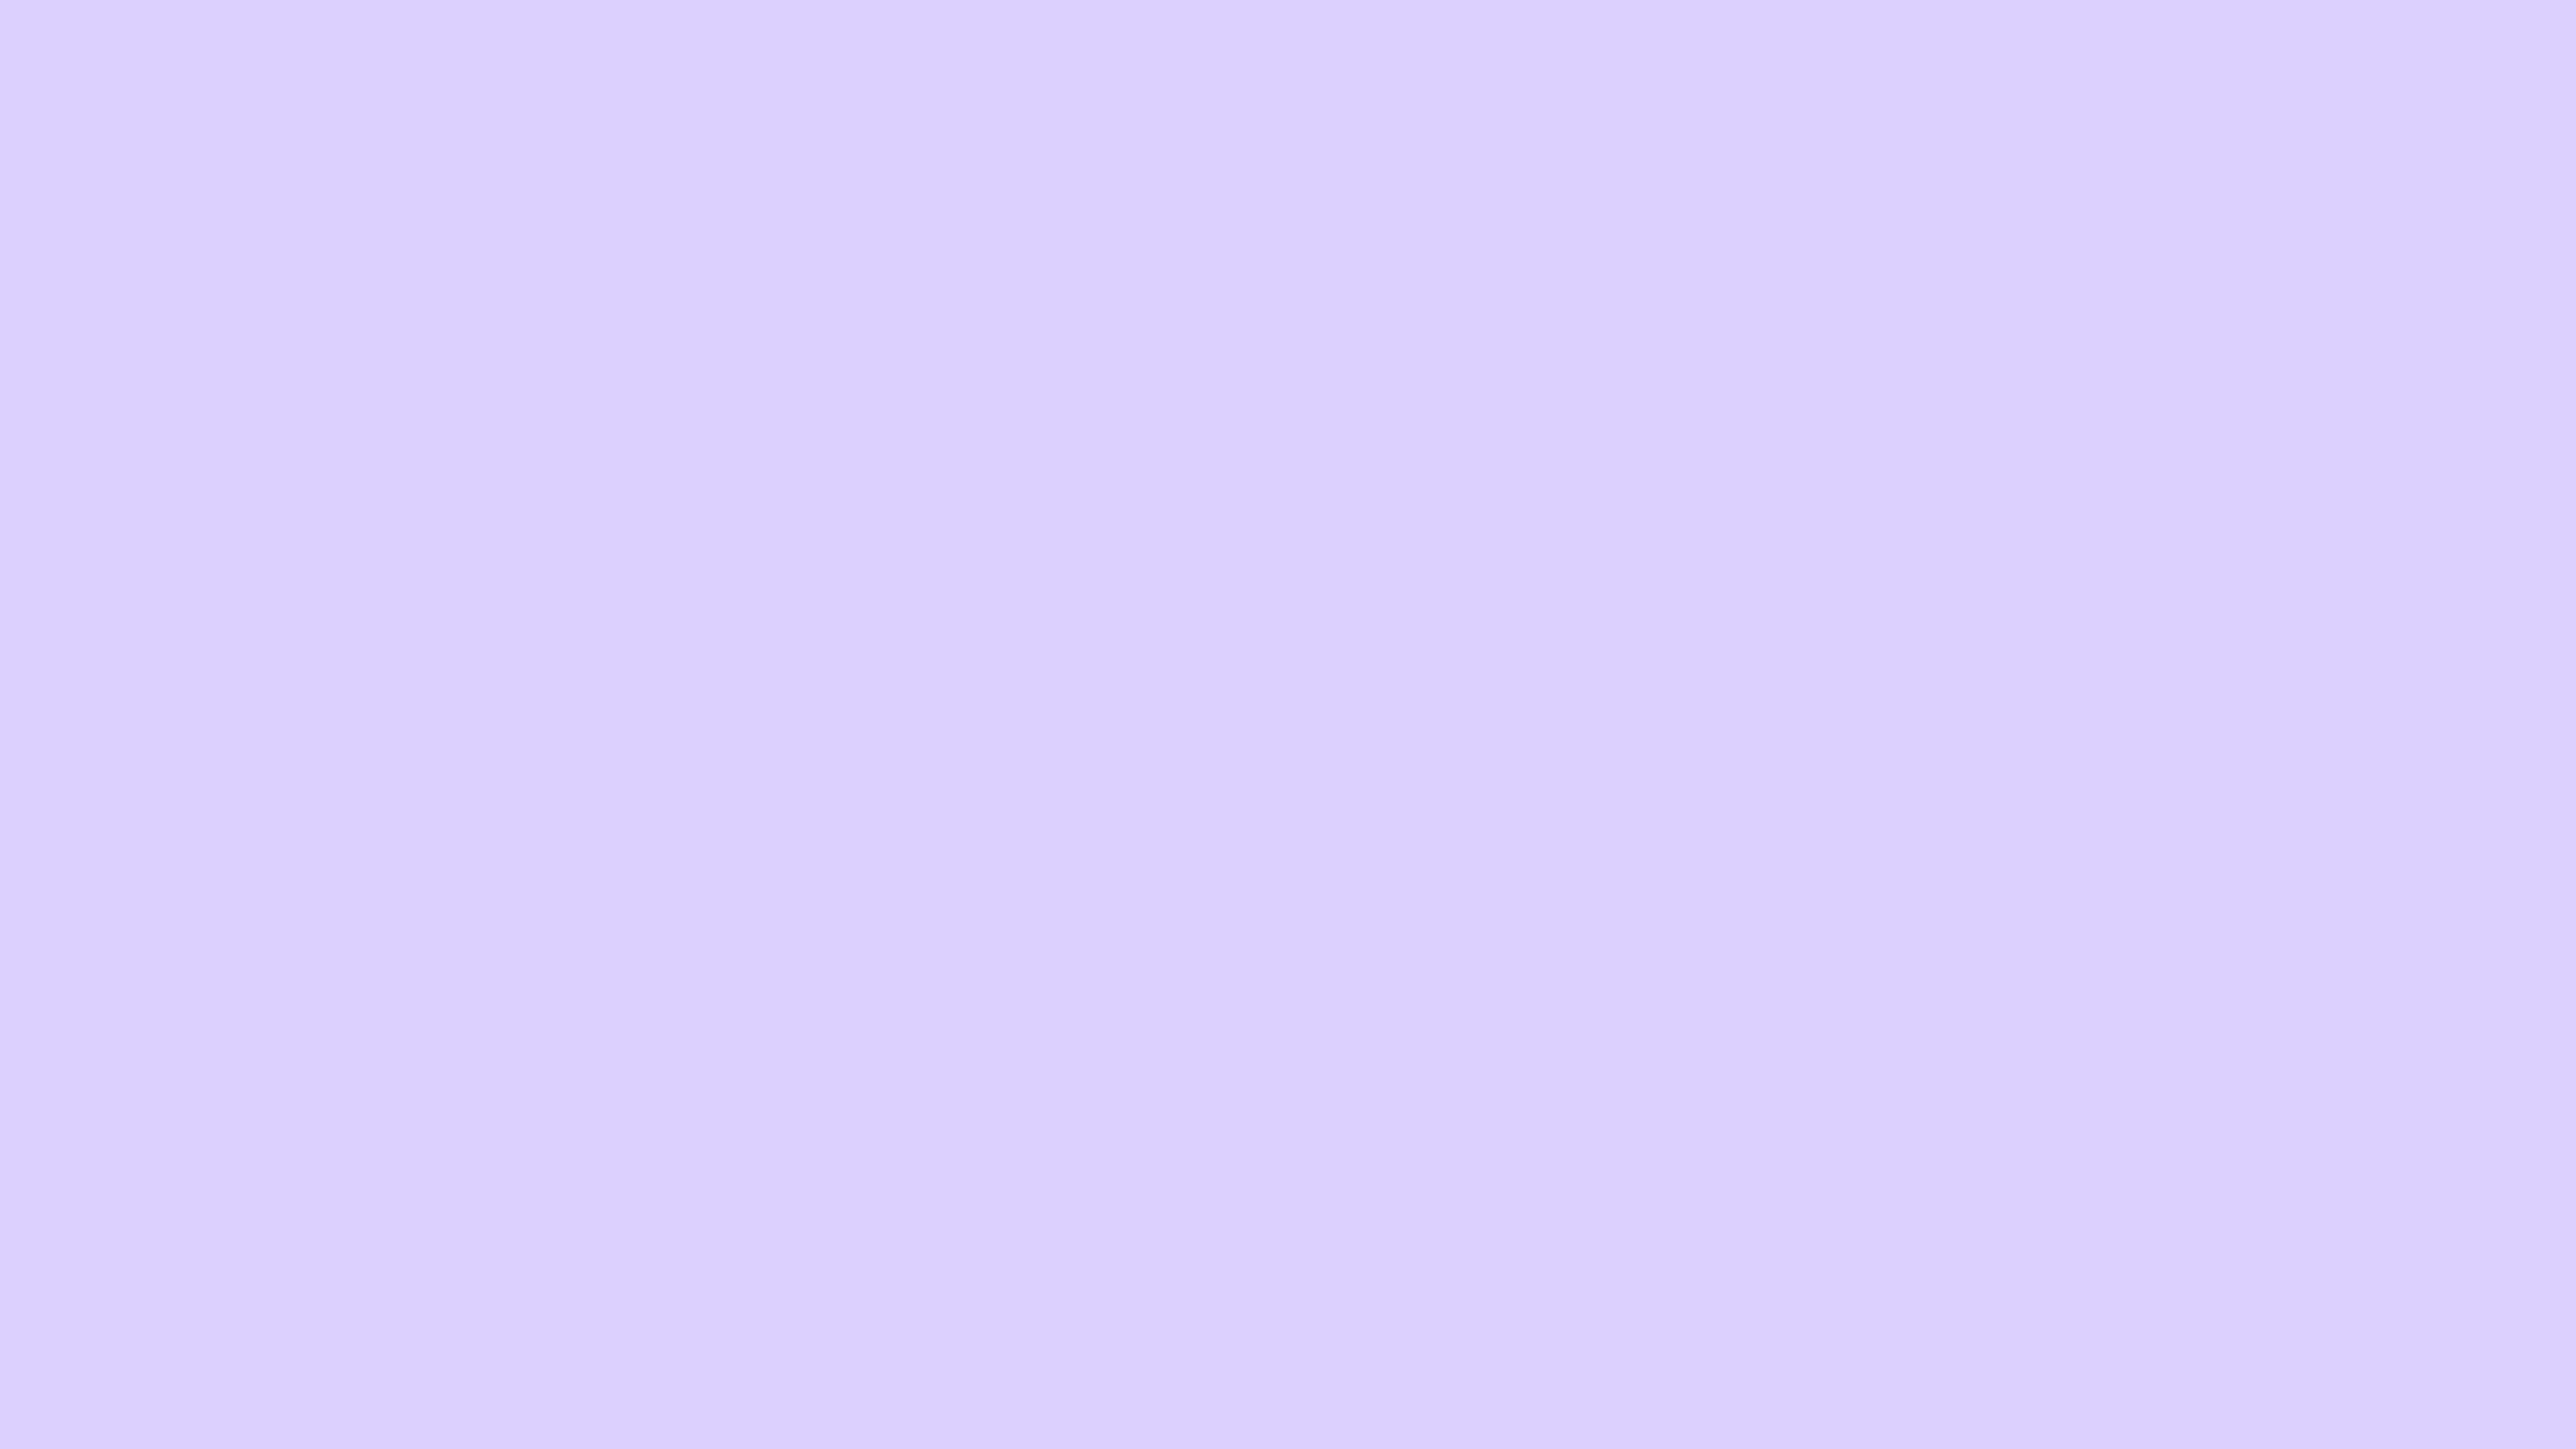 9. "Lavender" or "Lilac" shades - wide 6